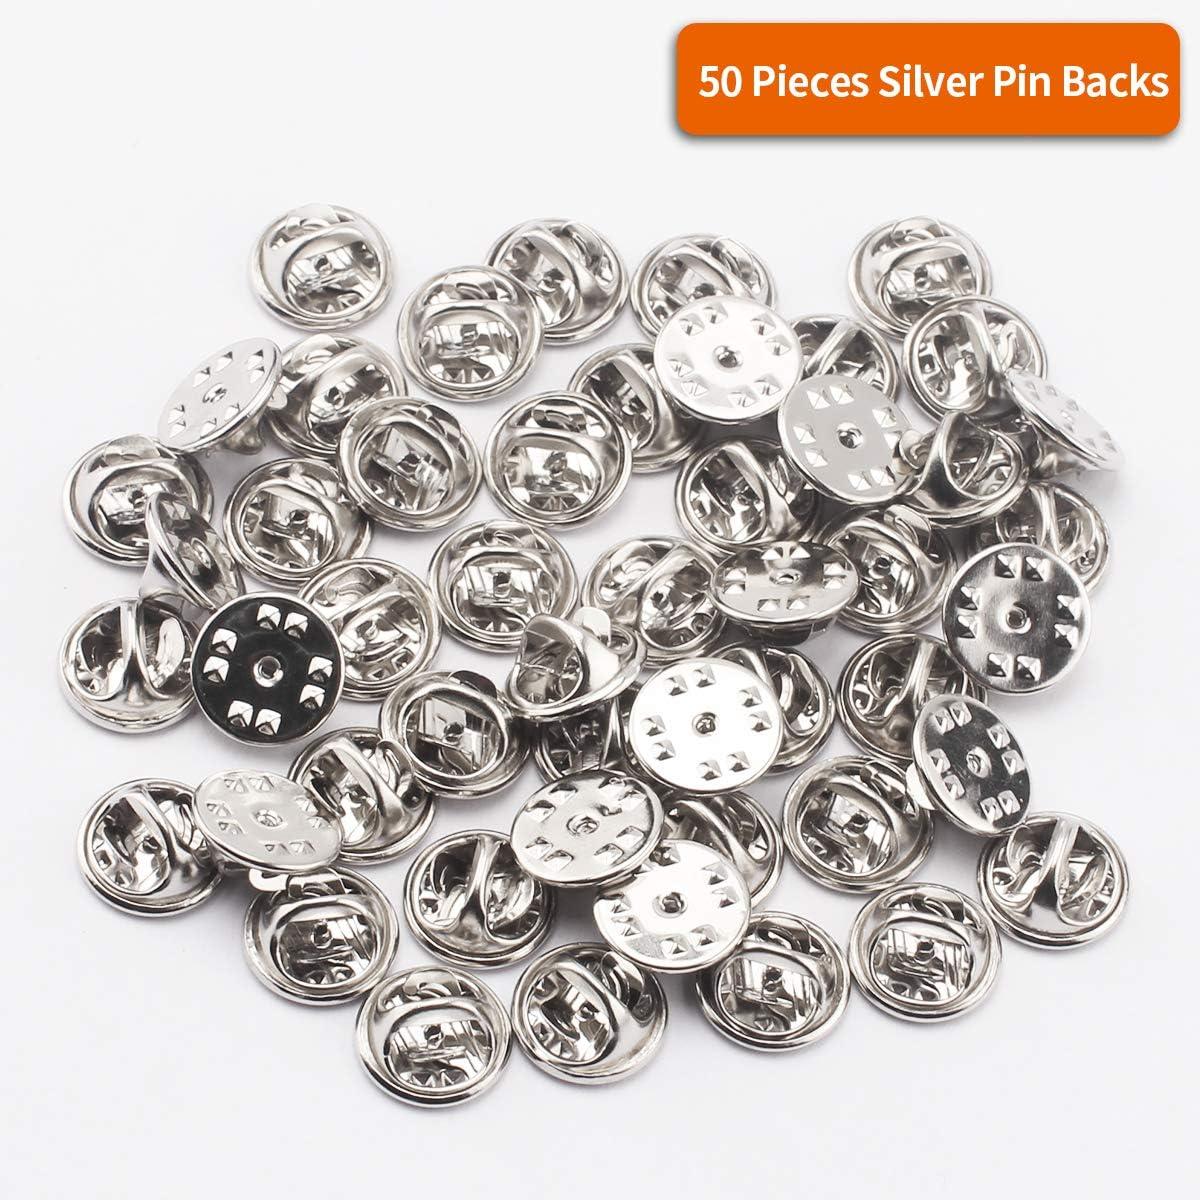 Silver Lapel Pin Backs with 10mm Glue On Pad | Clutch Pin Blanks | Brooch  Pin Back Findings | Scatter Pin Back | Badge Pin Backs | Tie Tack Backs (10